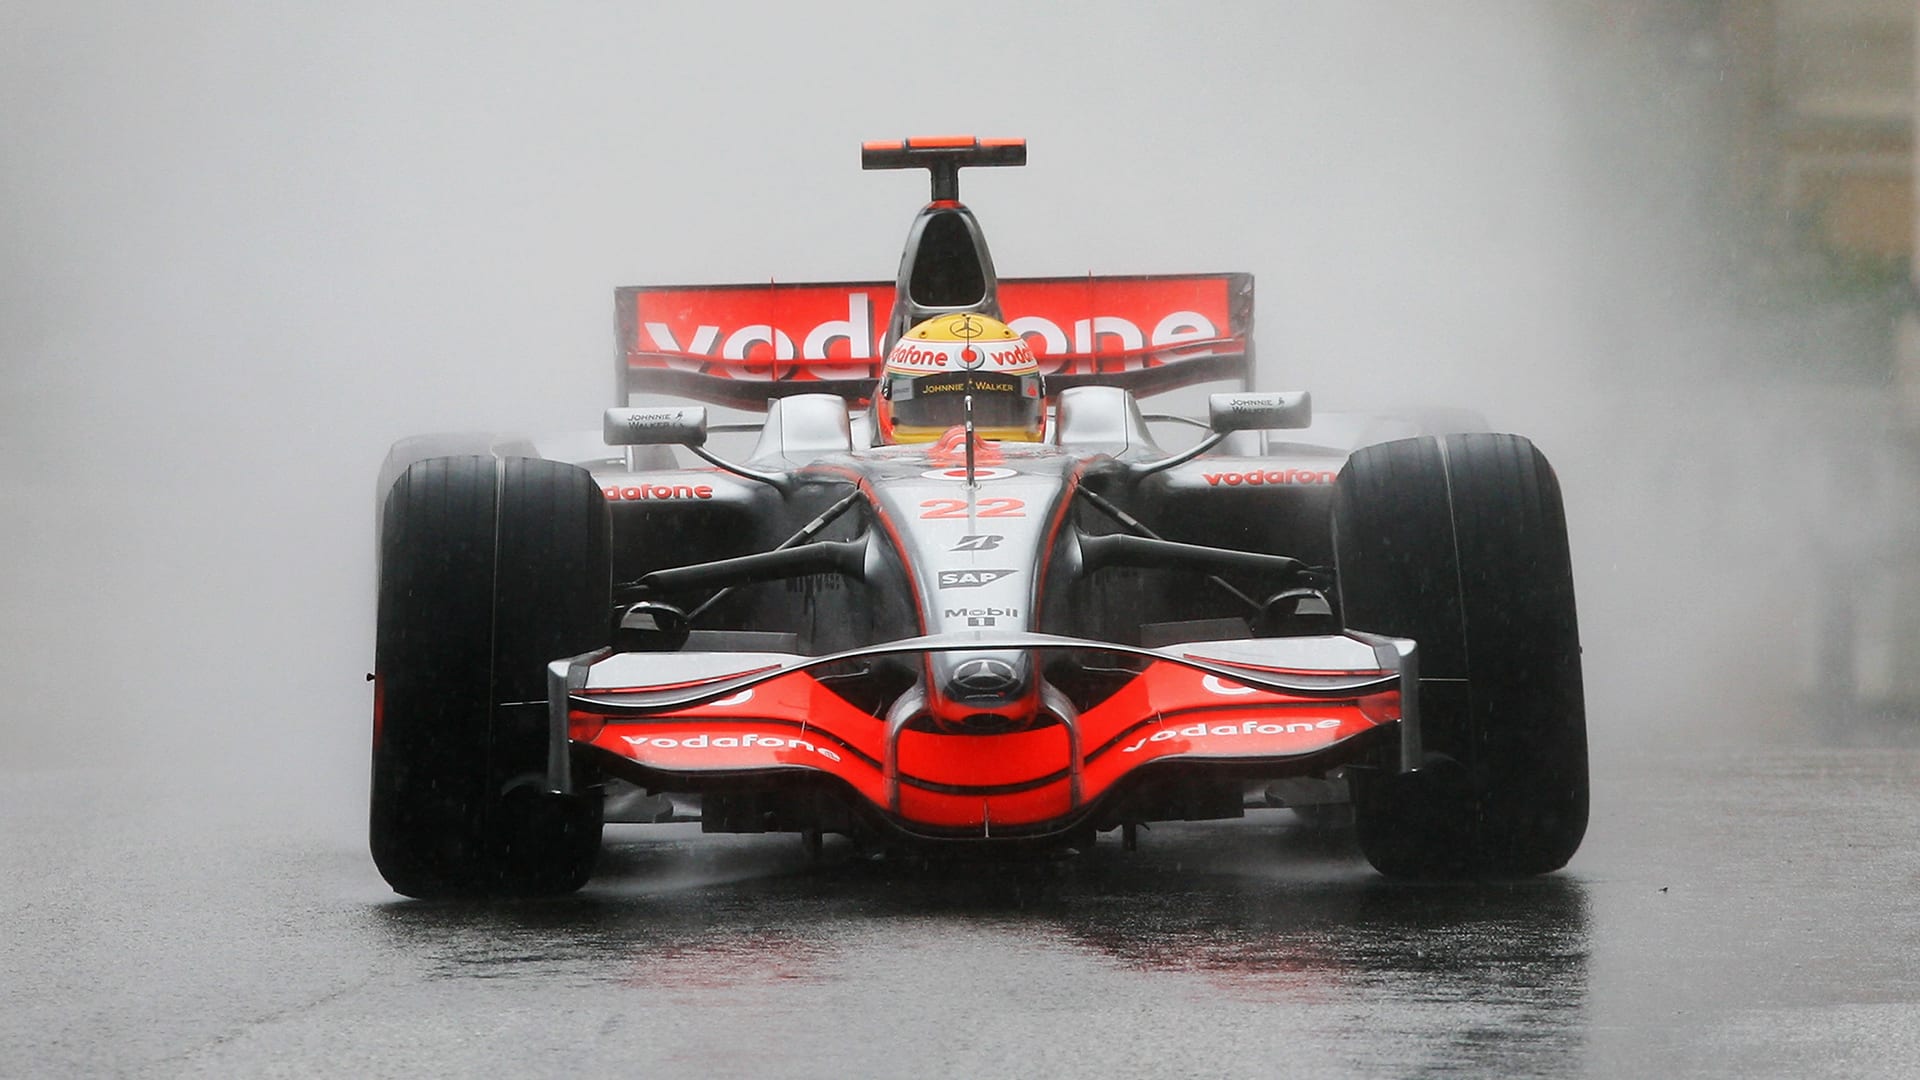 LIVESTREAM Relive the drama from a wet/dry 2008 Monaco Grand Prix